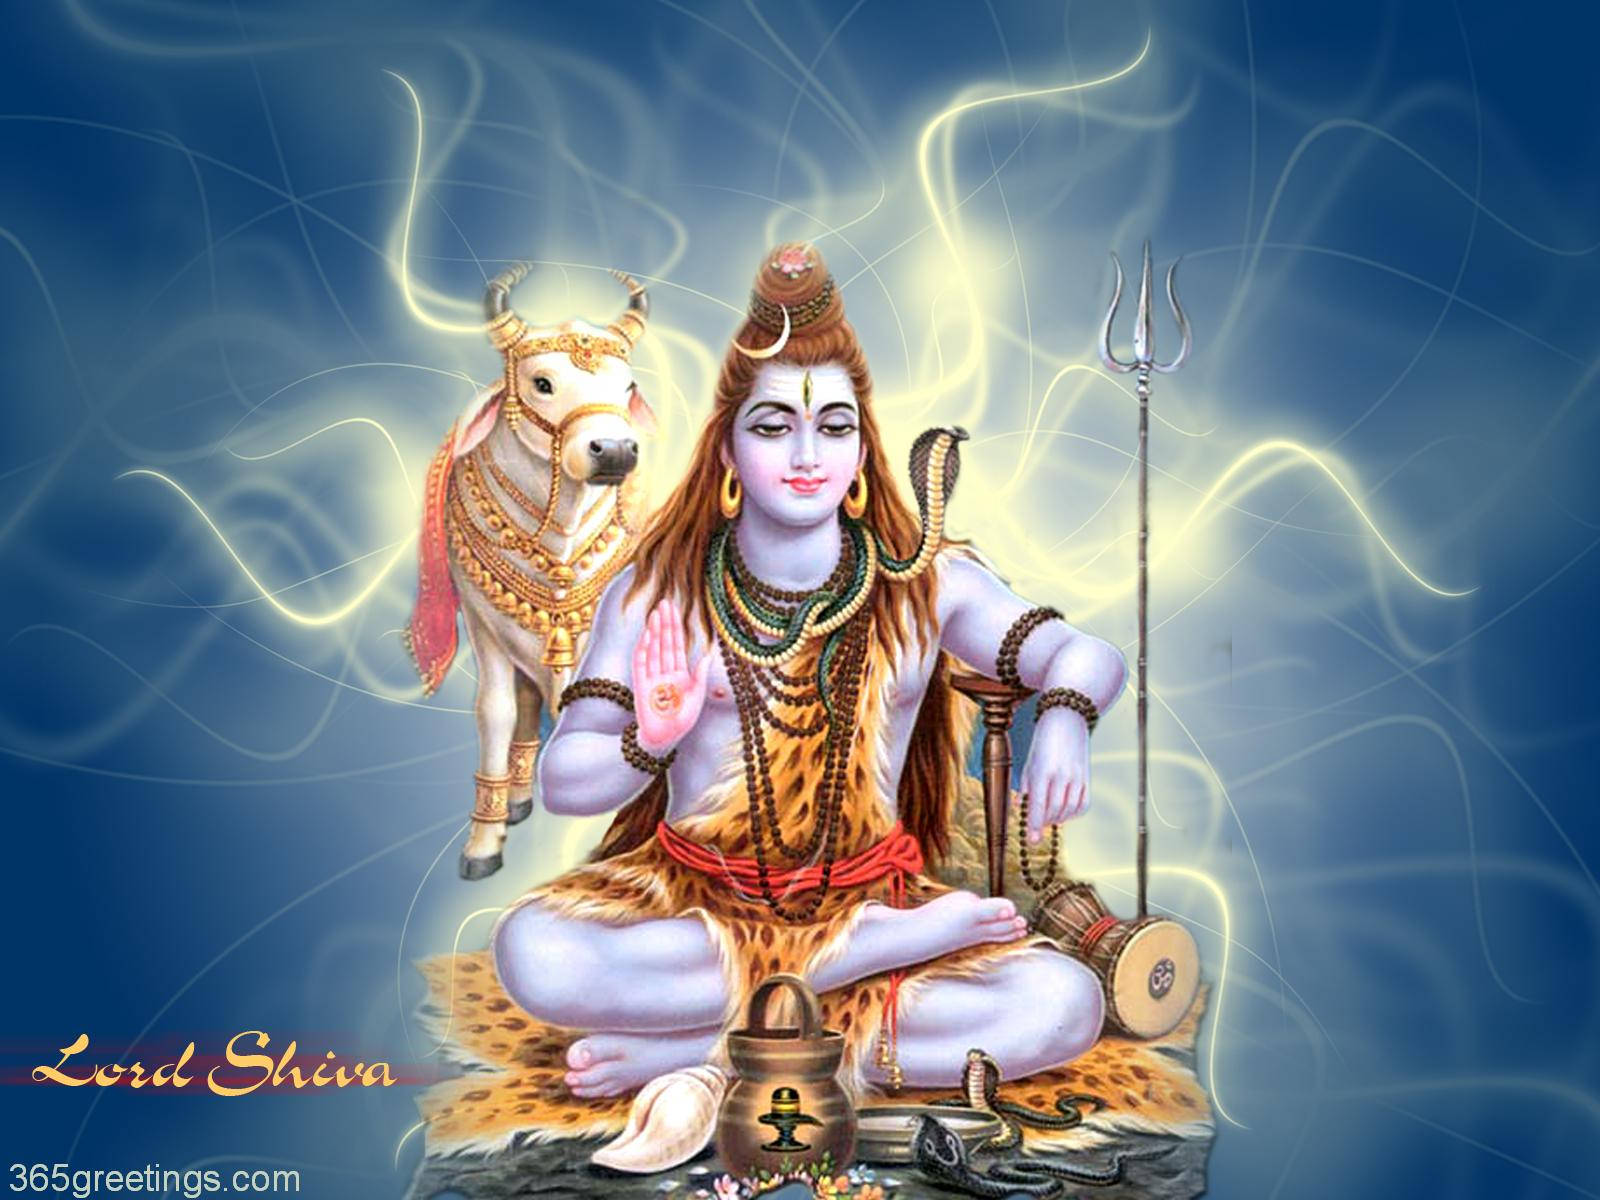 The Great Lord Shiva Wallpaper